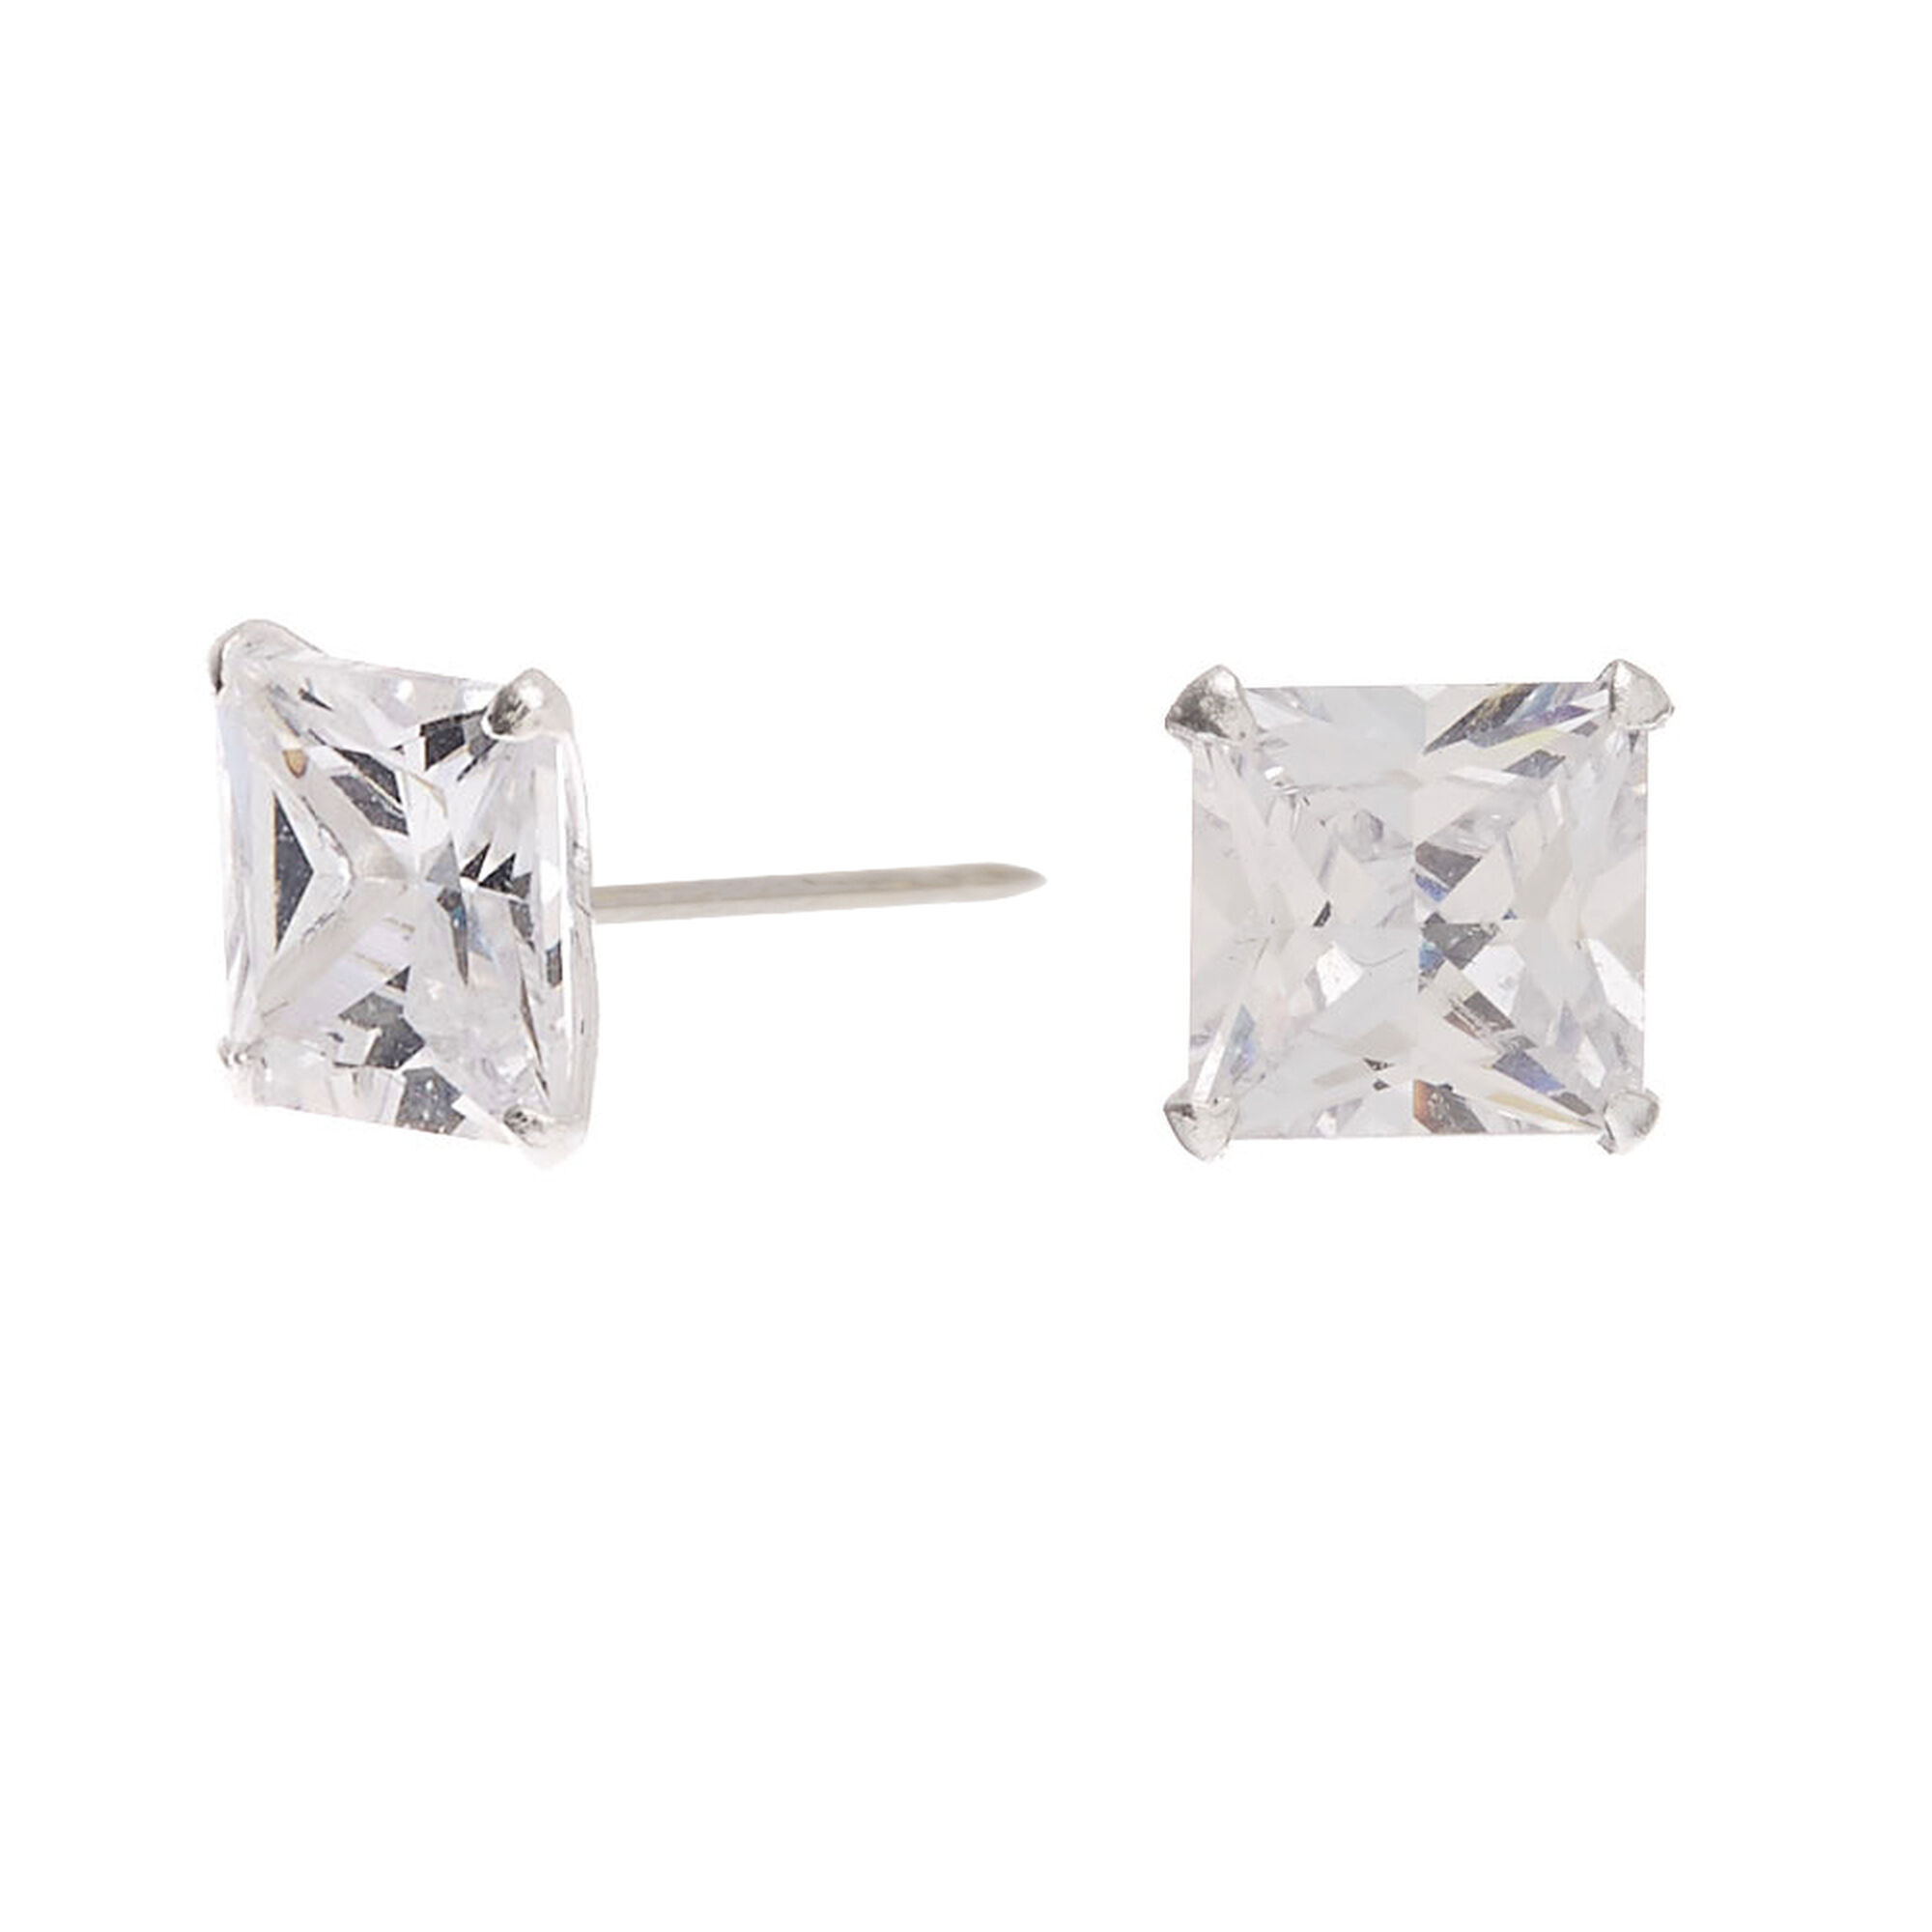 Discover more than 191 earrings square shape